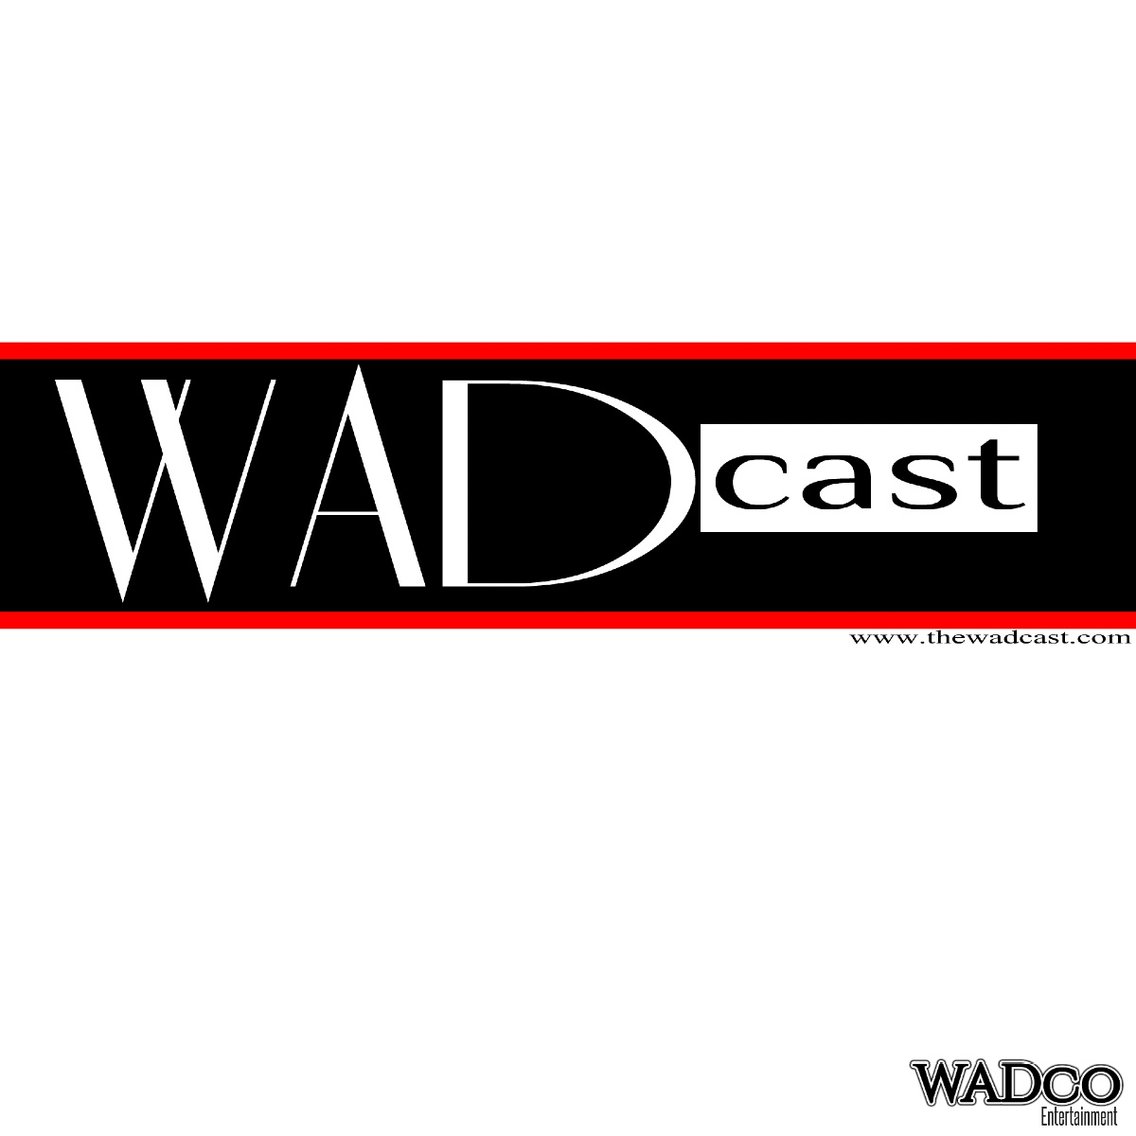 Wadcast - Cover Image